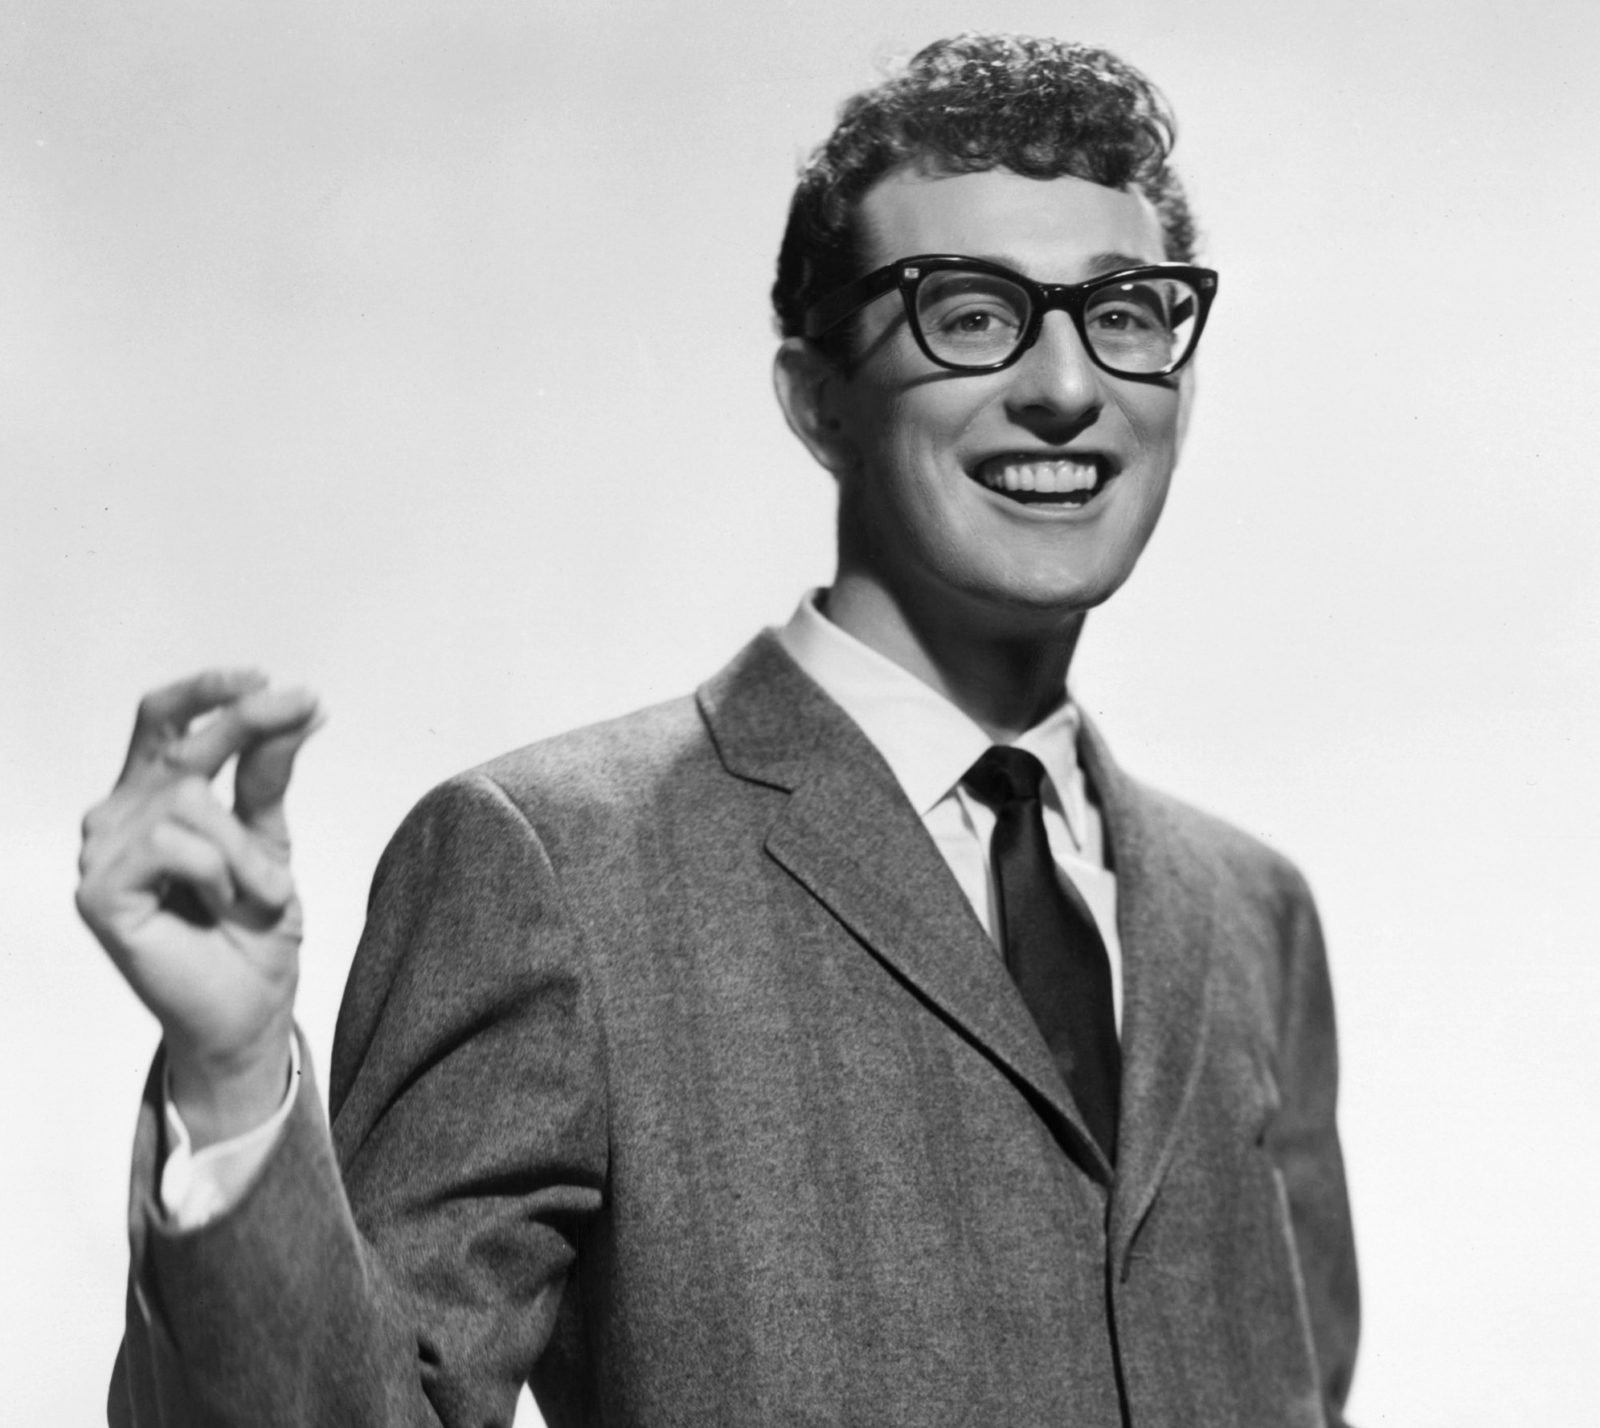 Buddy Holly cropped